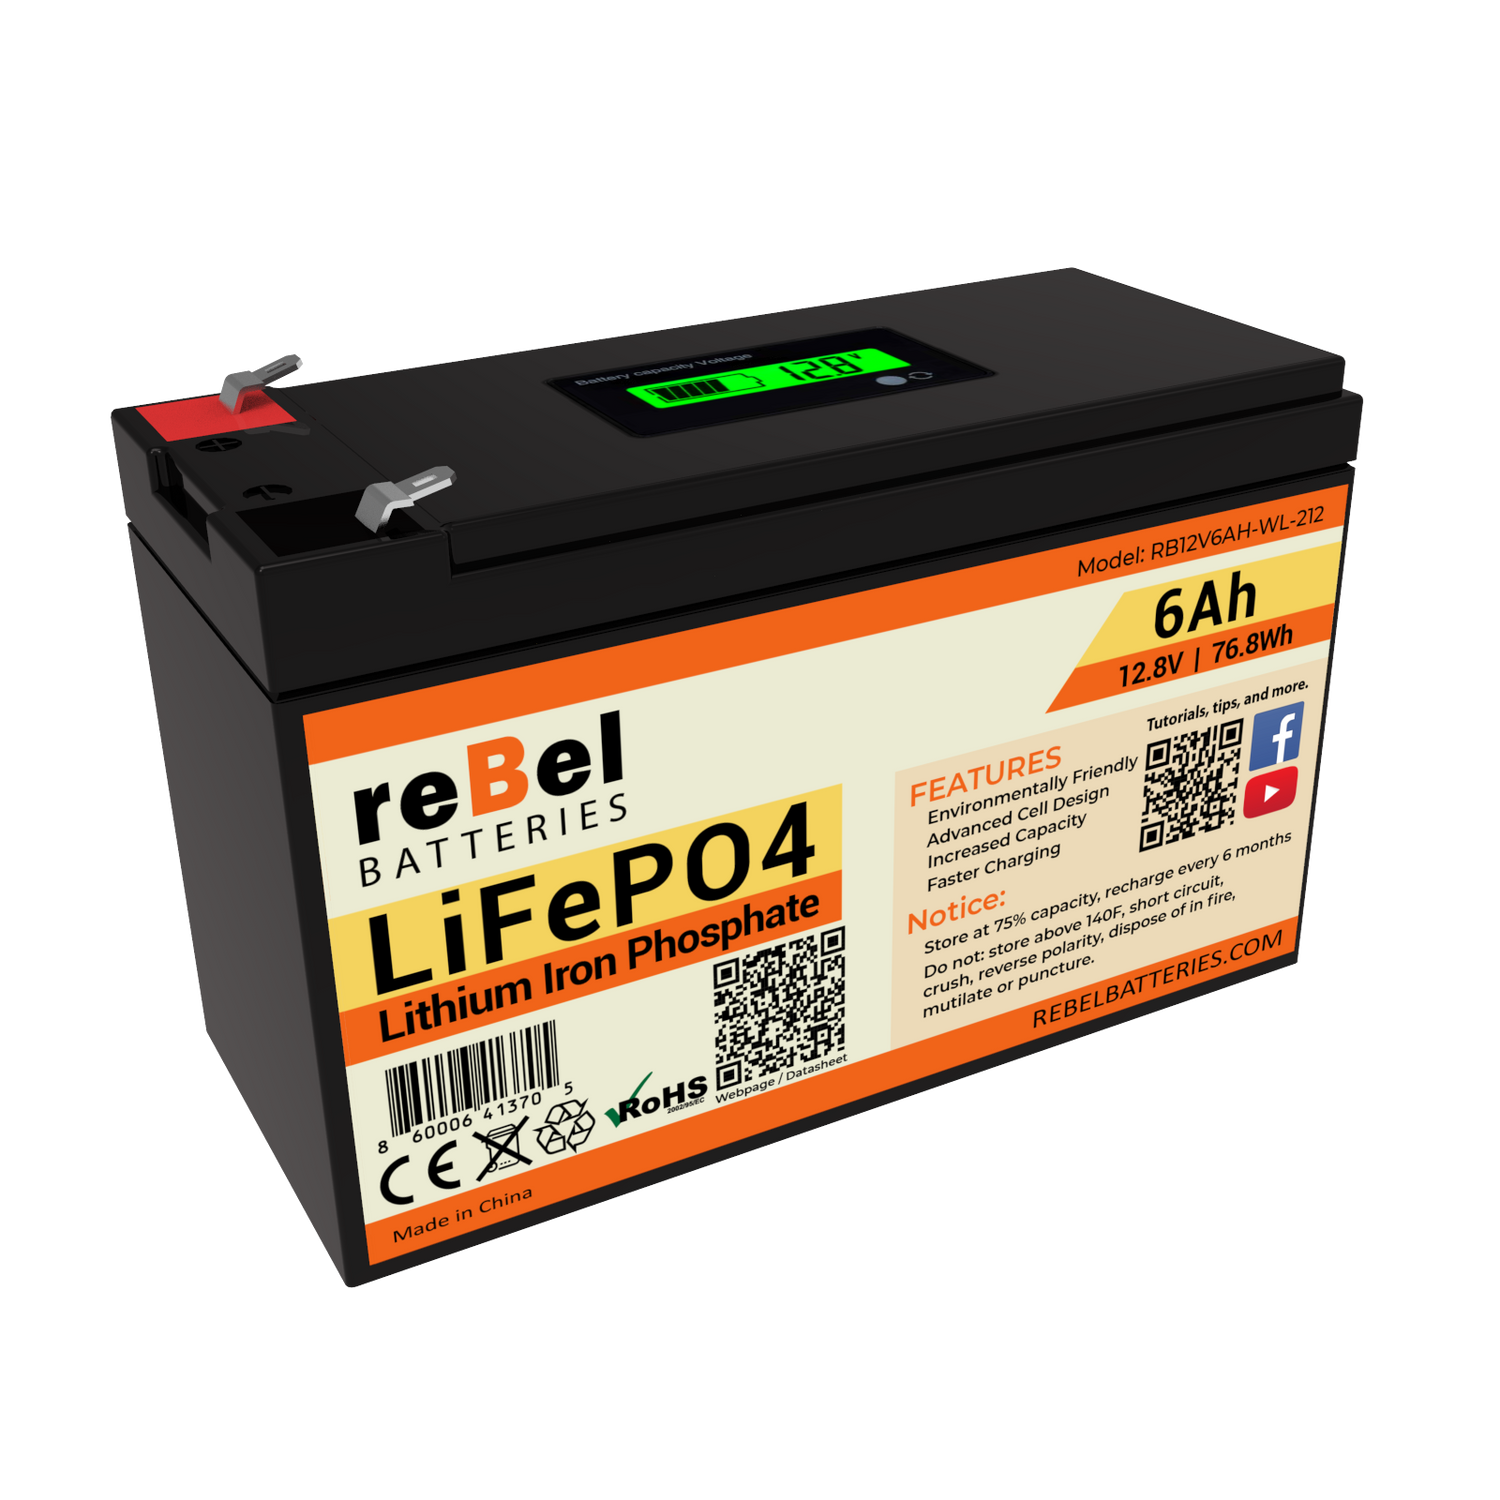 Can the 6AH and 12AH reBel batteries be used with a power inverter?